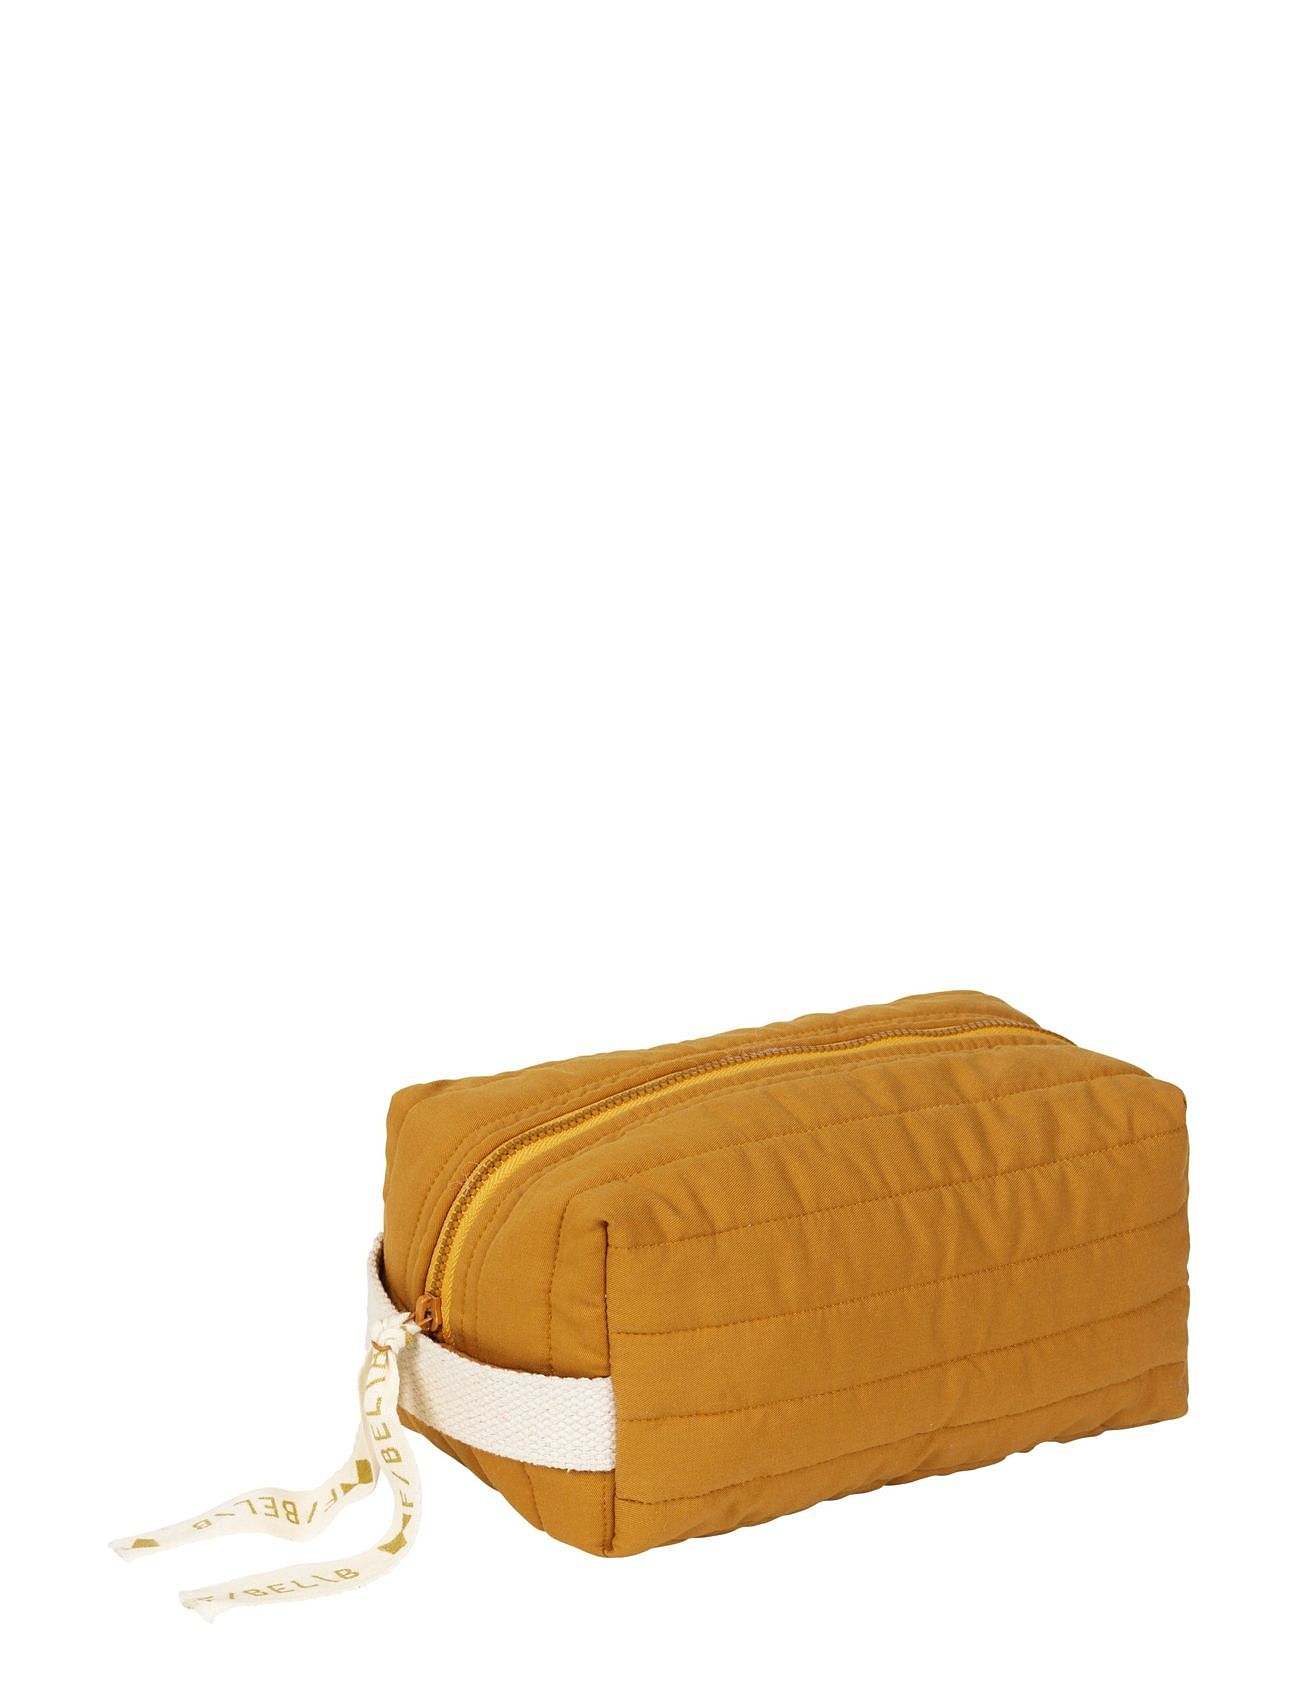 Quilted Toiletry Bag - Ochre Accessories Bags Toiletry Bag Yellow Fabelab